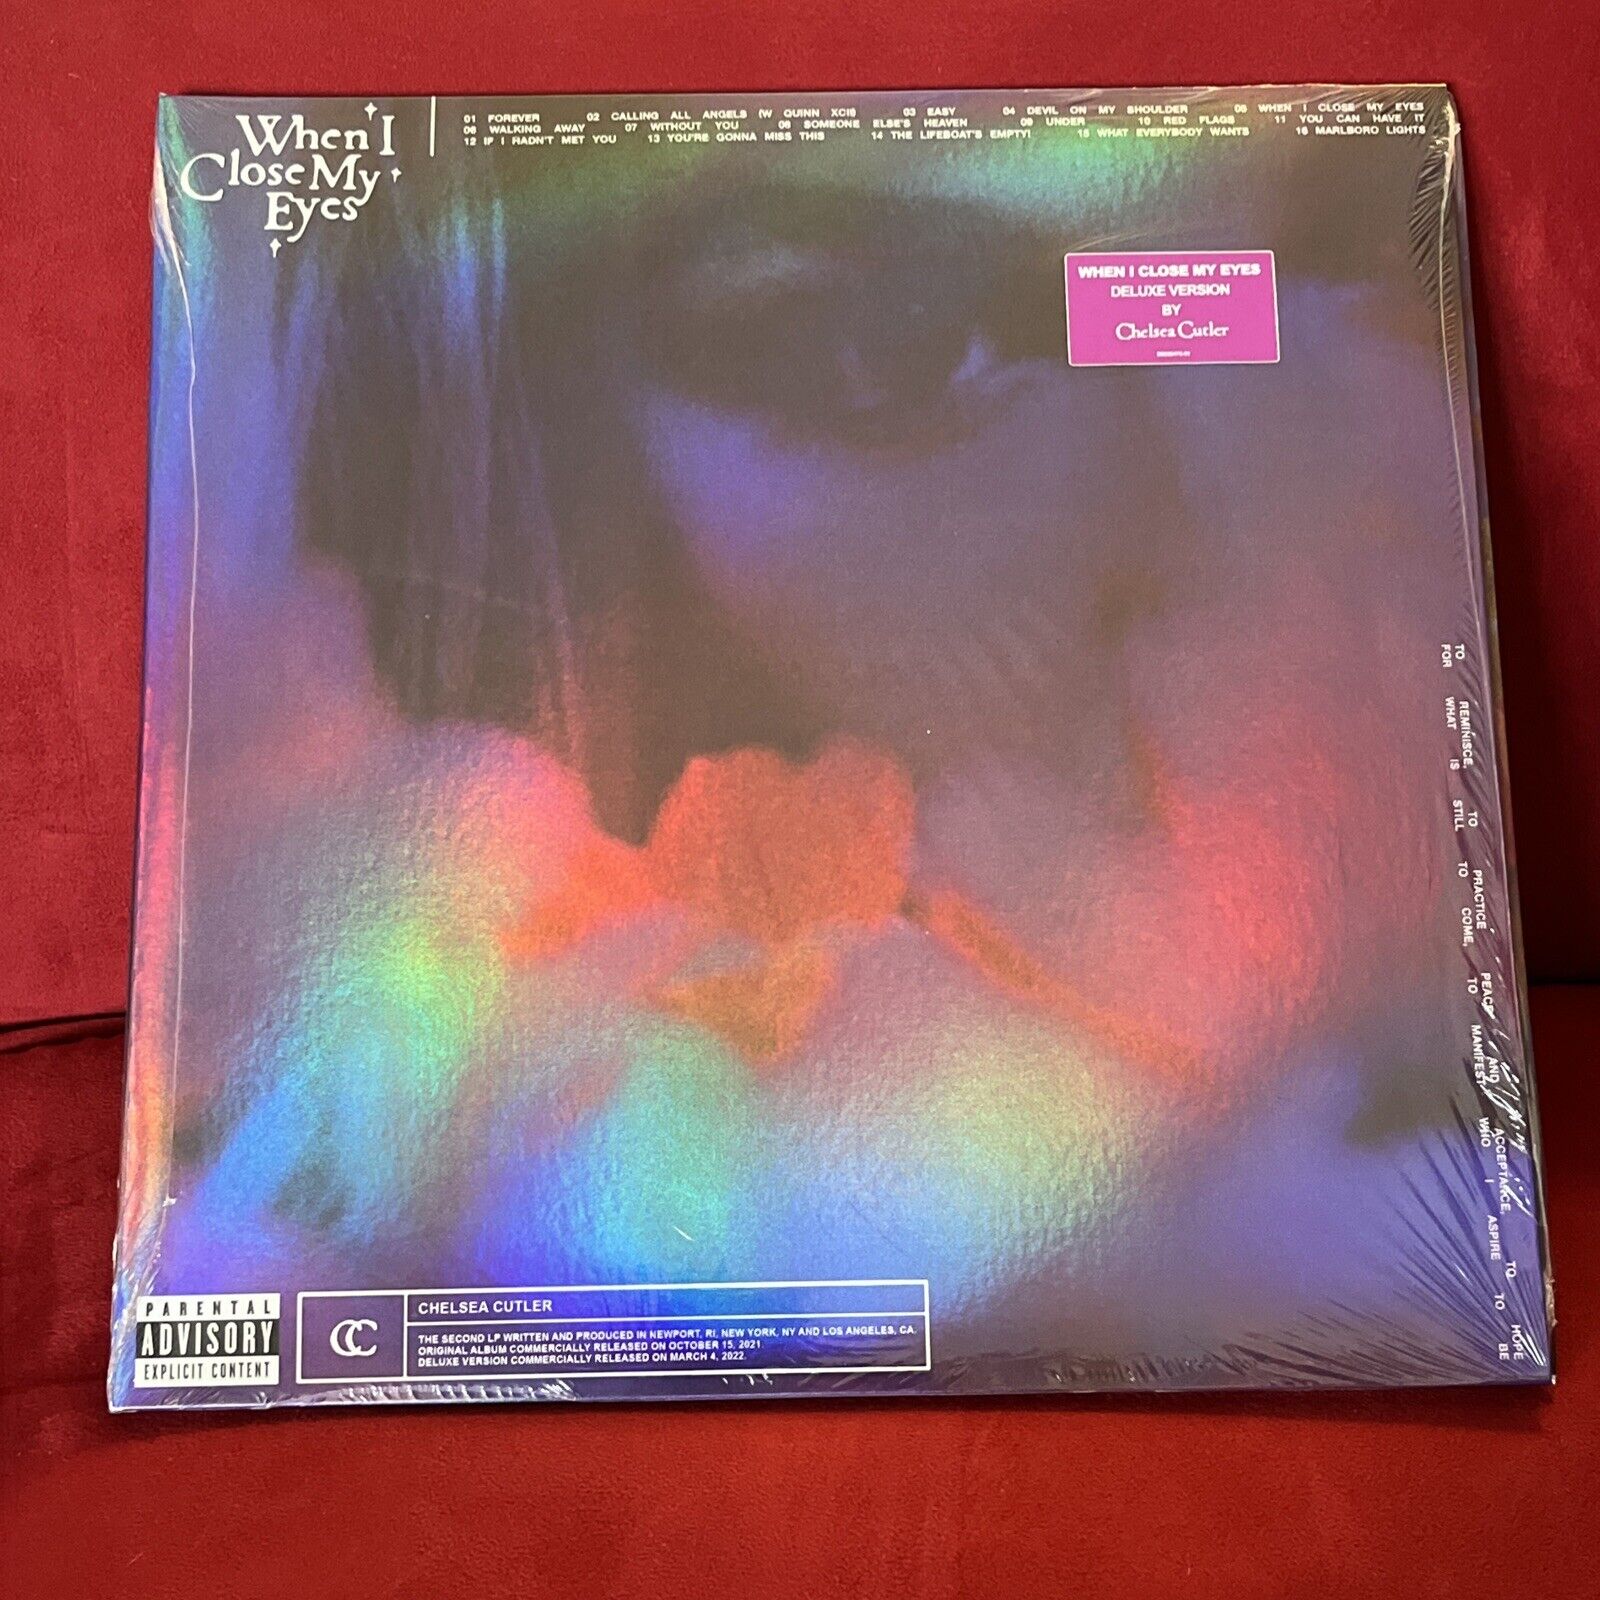 NEW Chelsea Cutler When I Close My Eyes Deluxe Clear 2x Vinyl Lenticular Cover